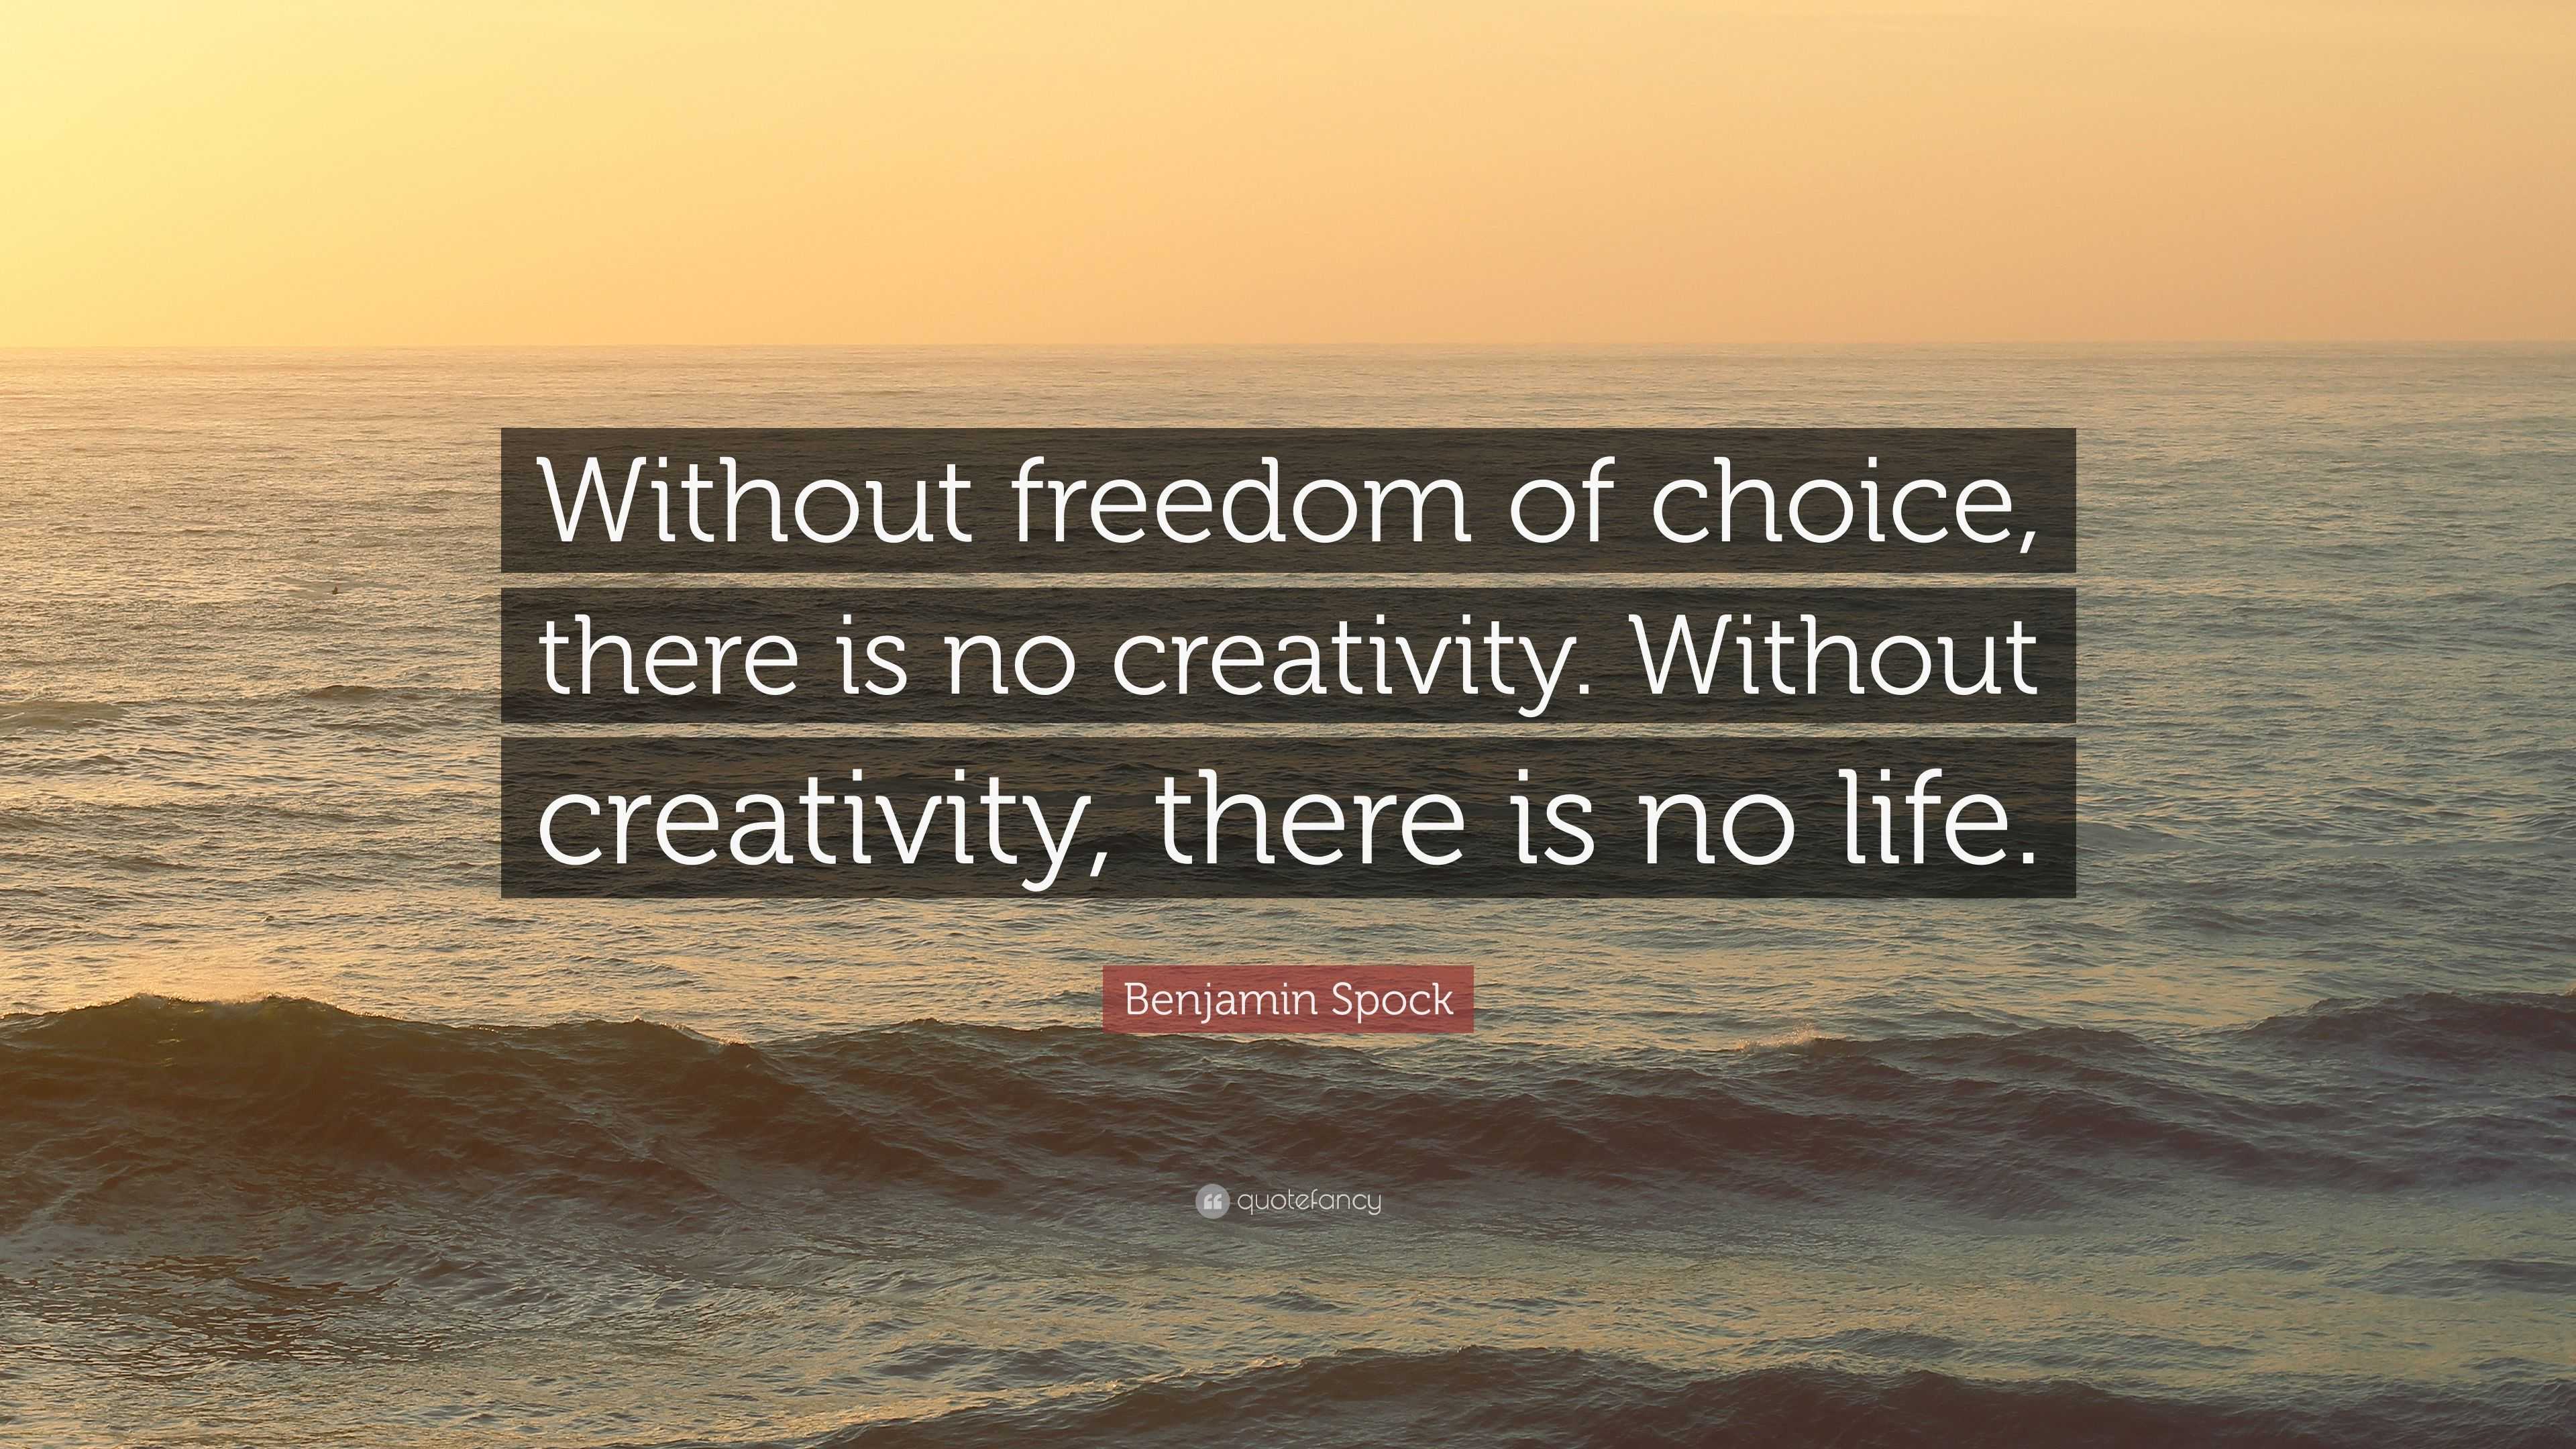 Benjamin Spock Quote “Without Freedom Choice There Is No Benjamin Spock Quote Without Freedom Choice There Is No Benjamin Spock Without